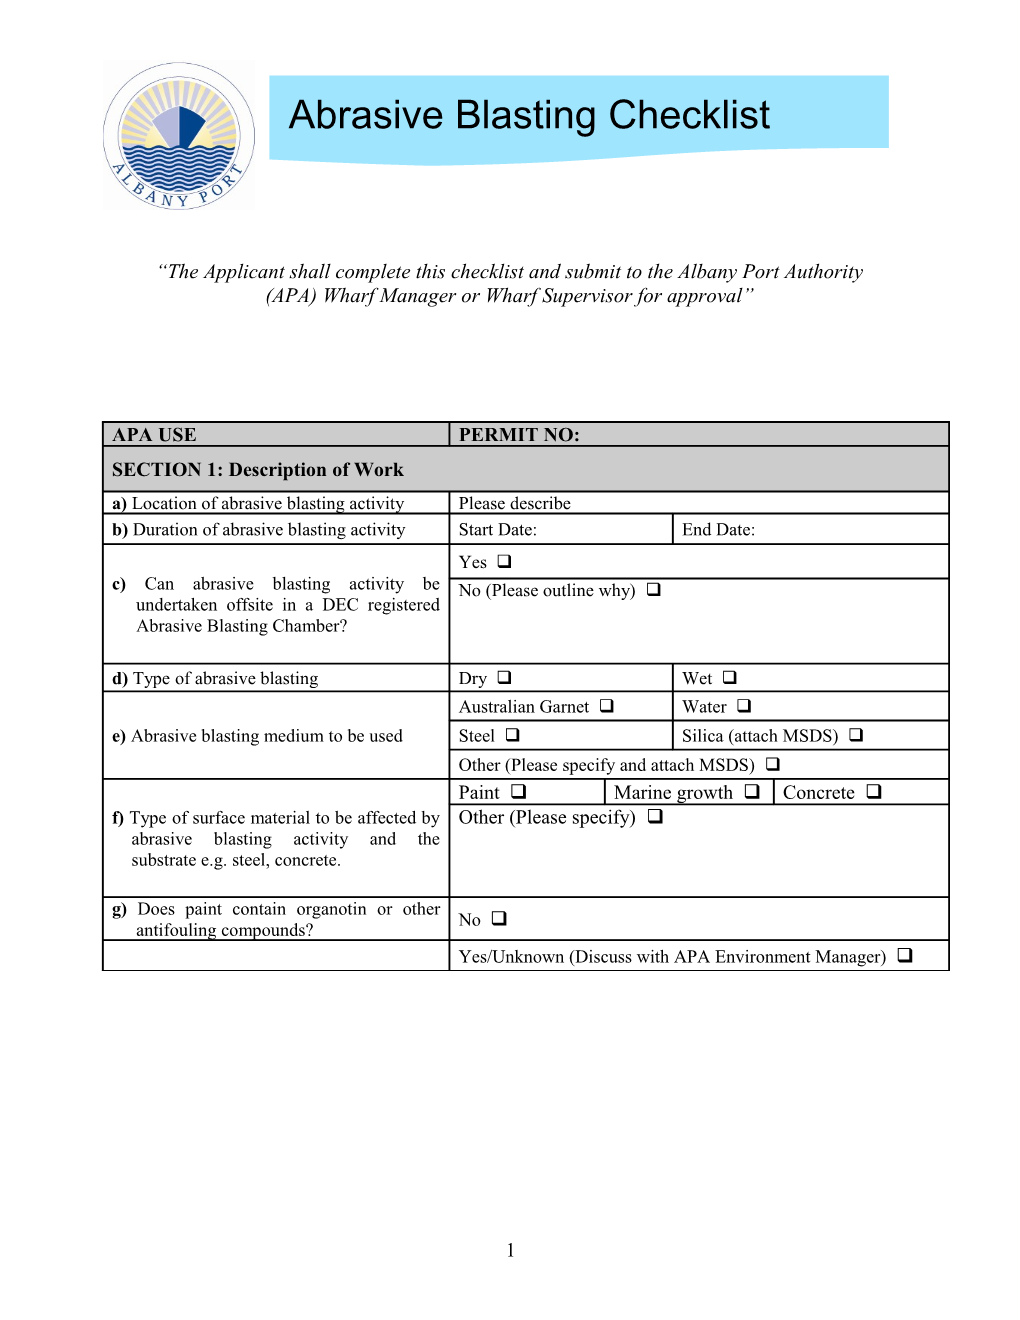 The Applicant Shall Complete This Checklist and Submit to the Albany Port Authority (APA)